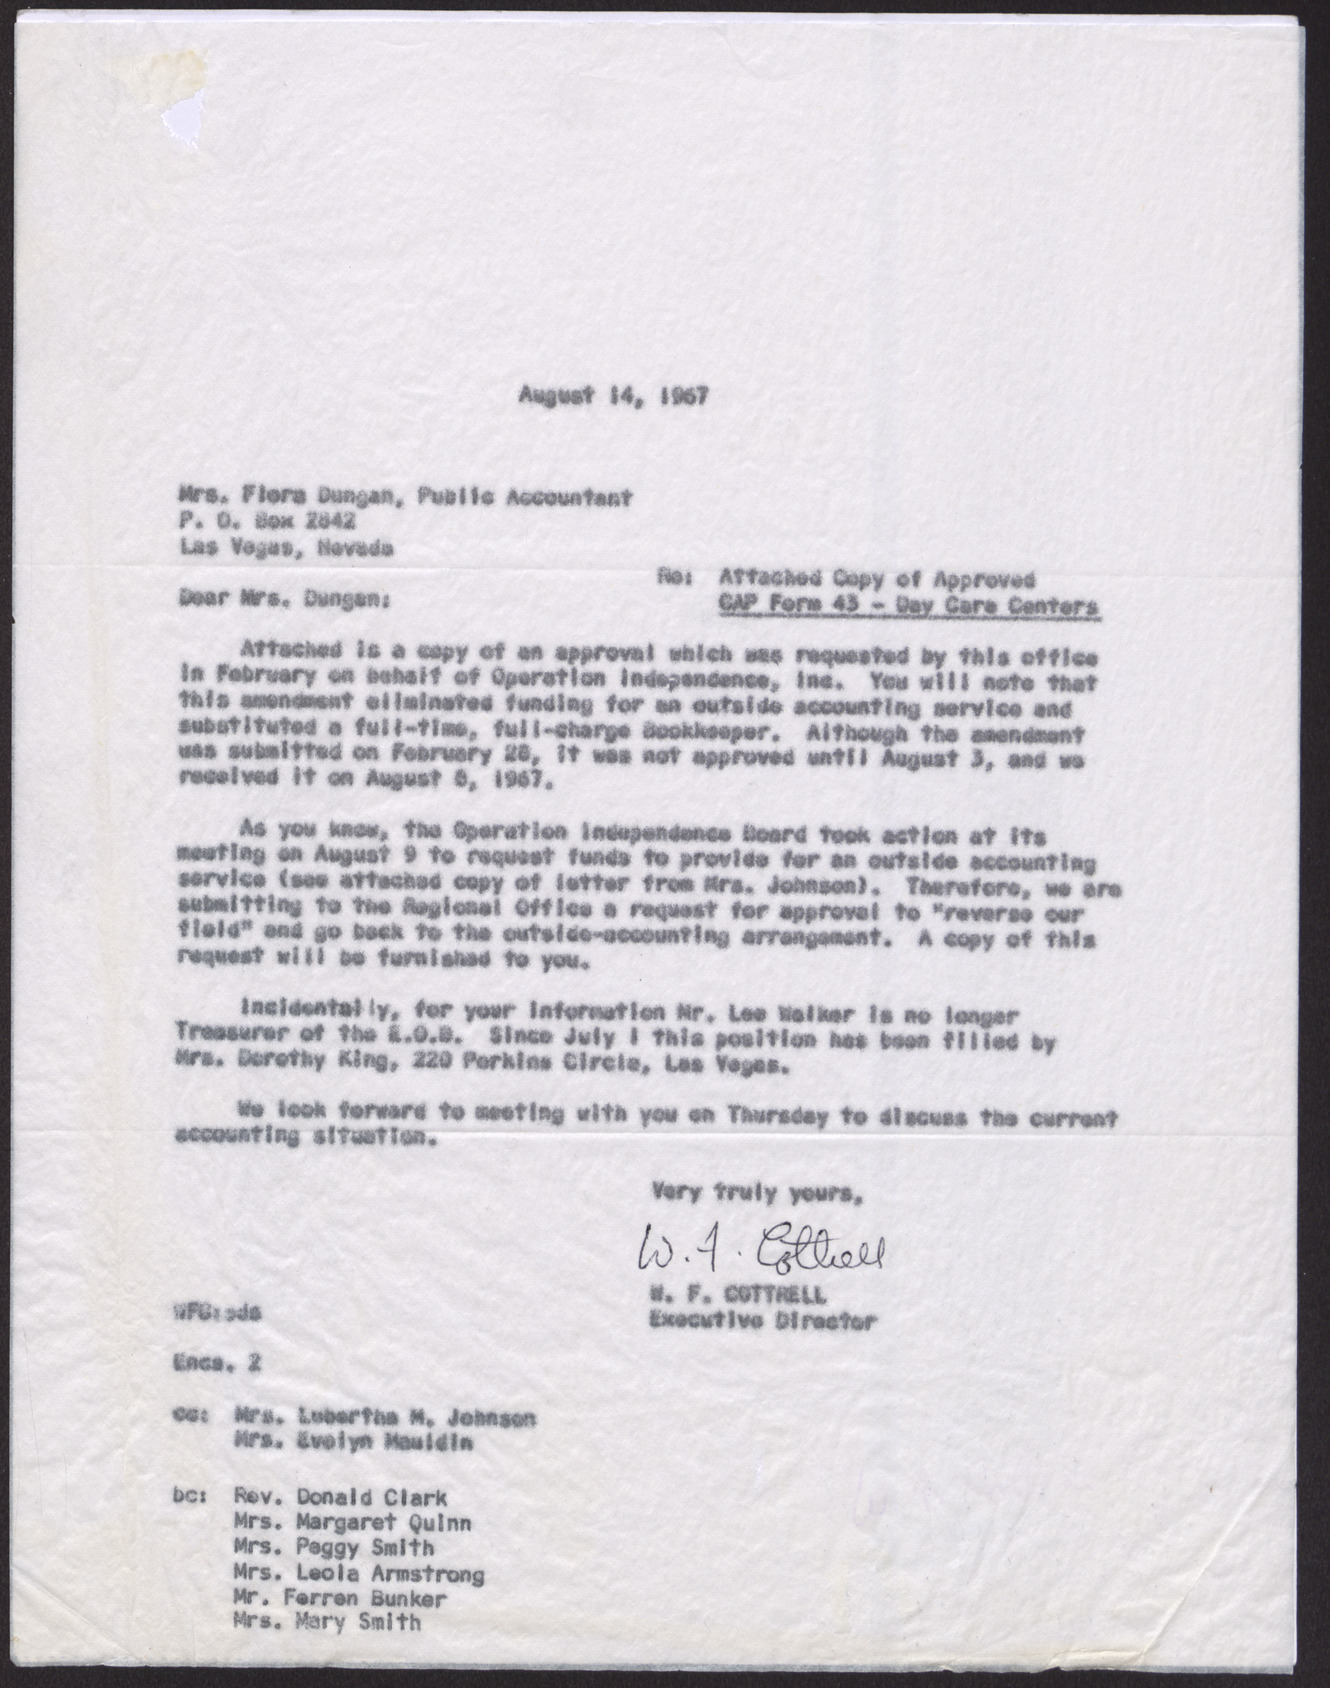 Letter to Mrs. Flora Dungan from W. F. Cottrell, August 14, 1967